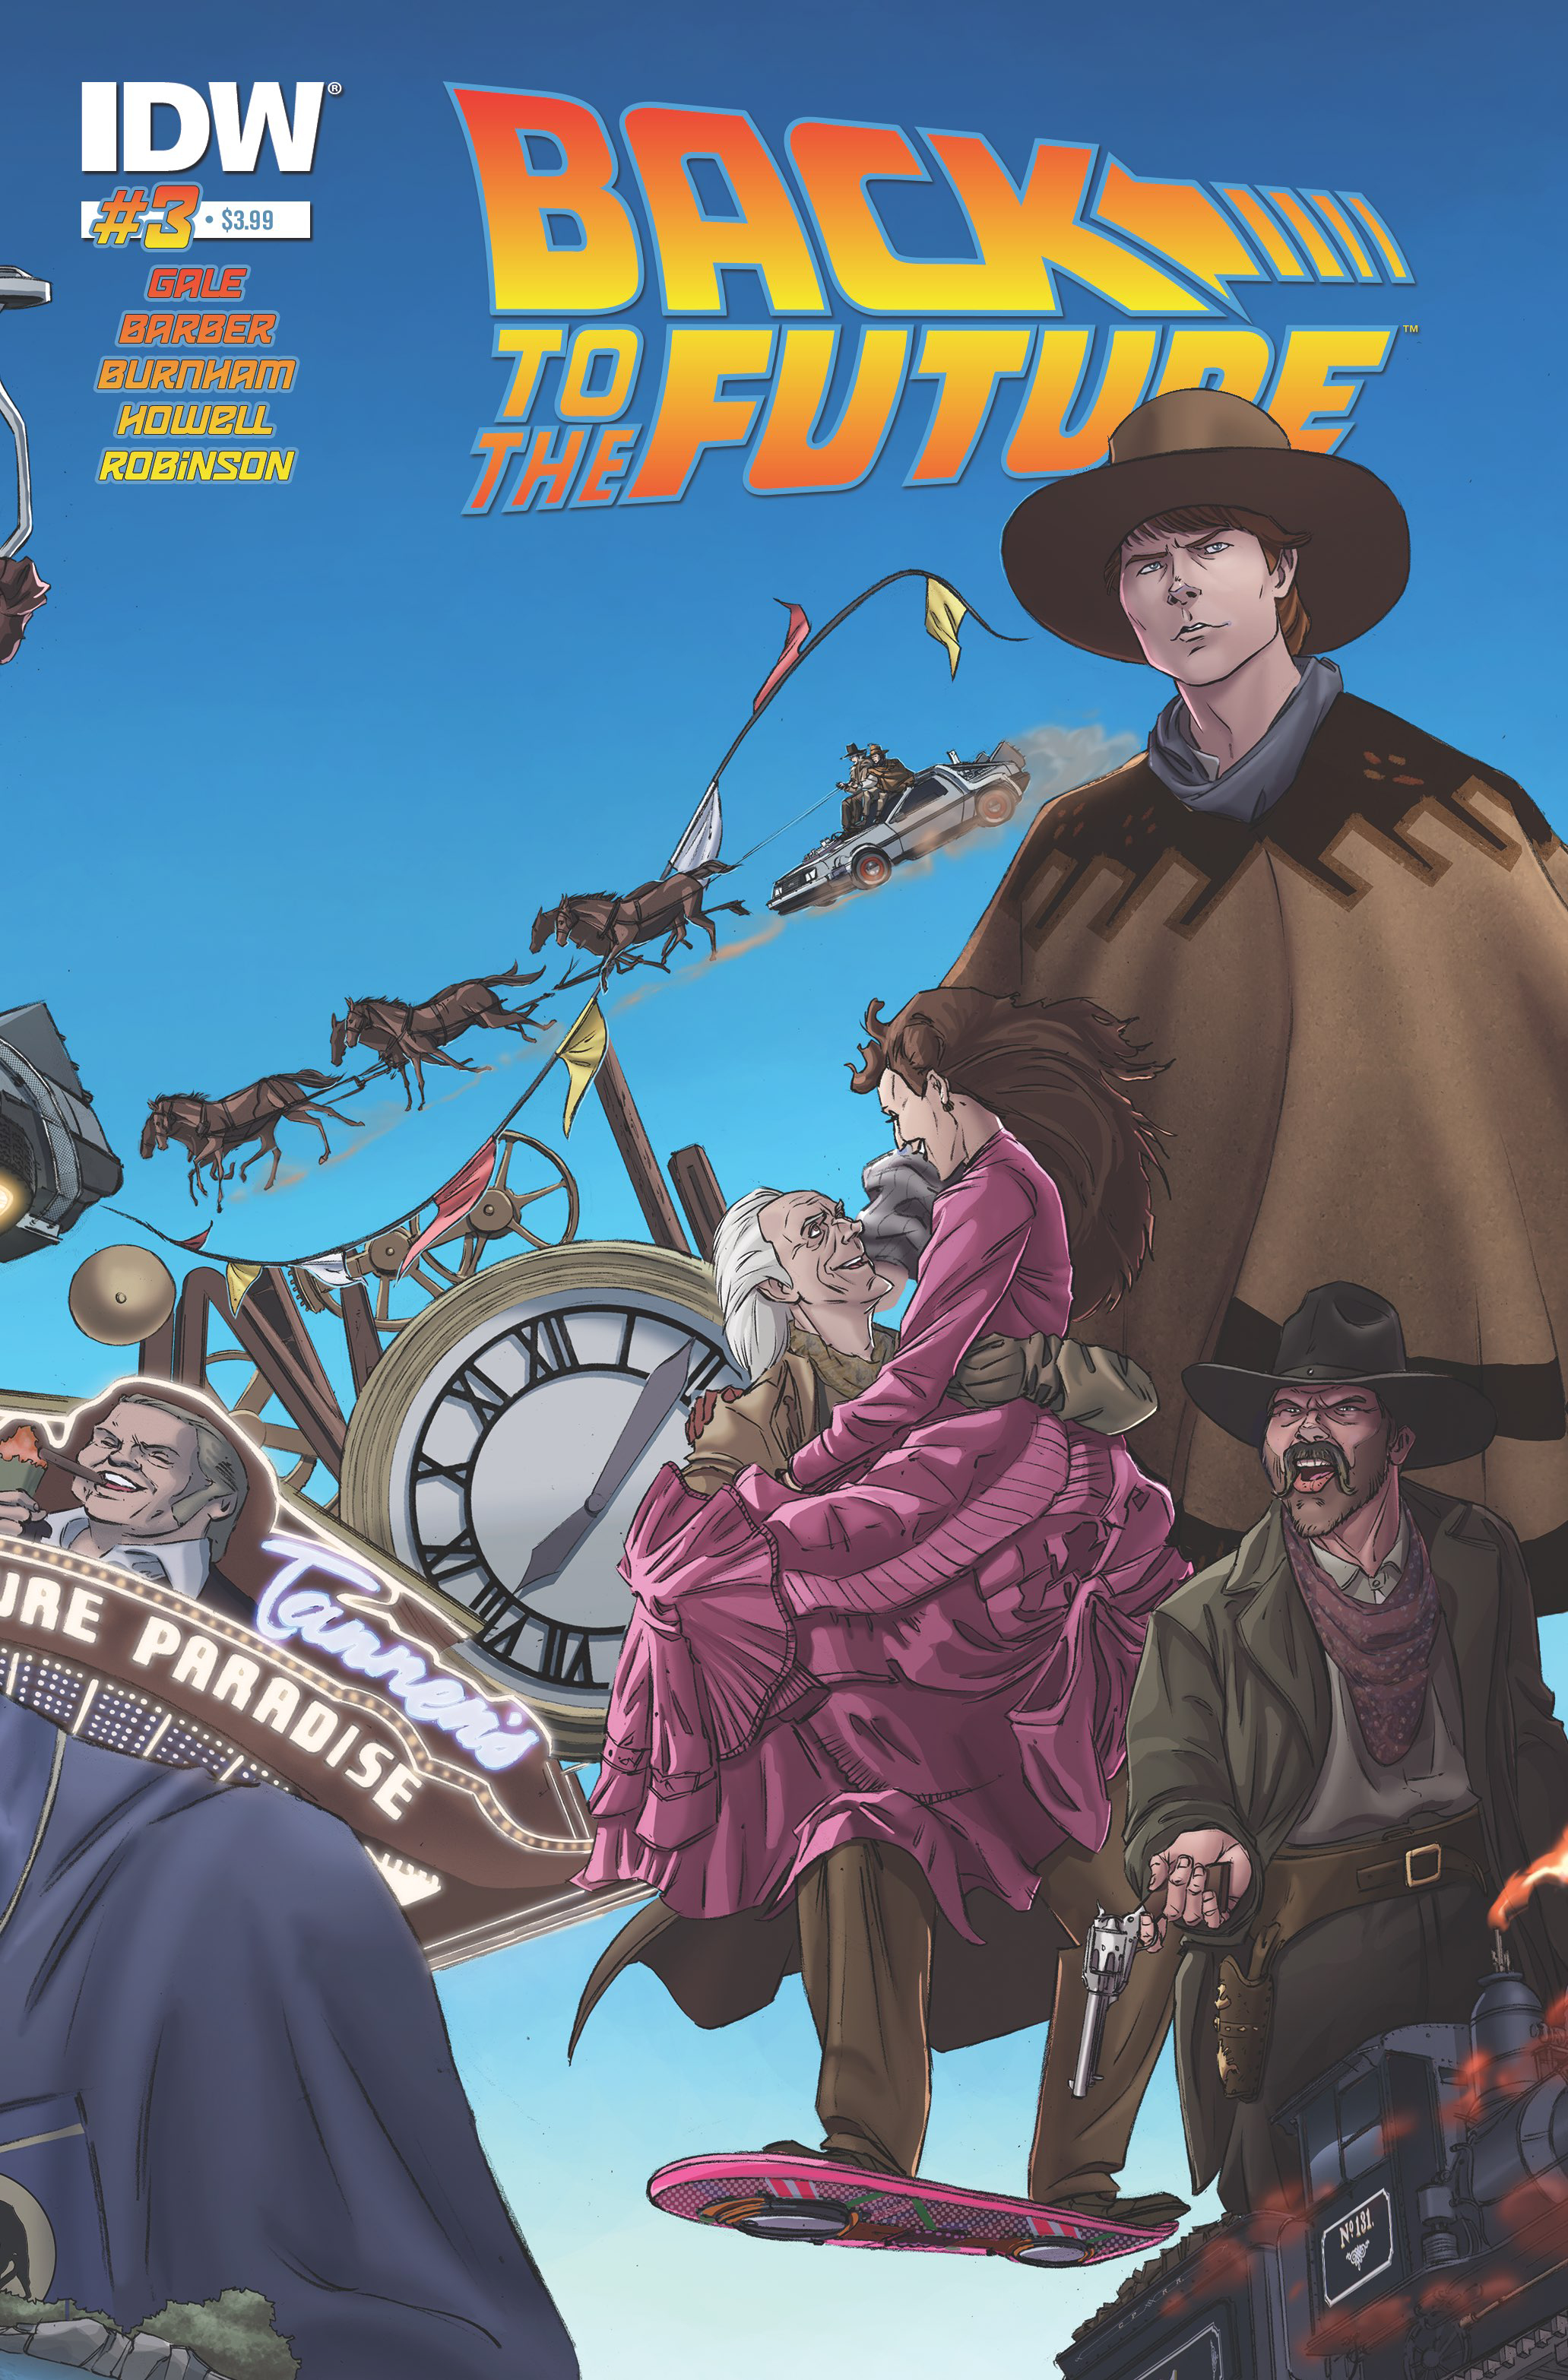 BACK TO THE FUTURE #3 (OF 4)